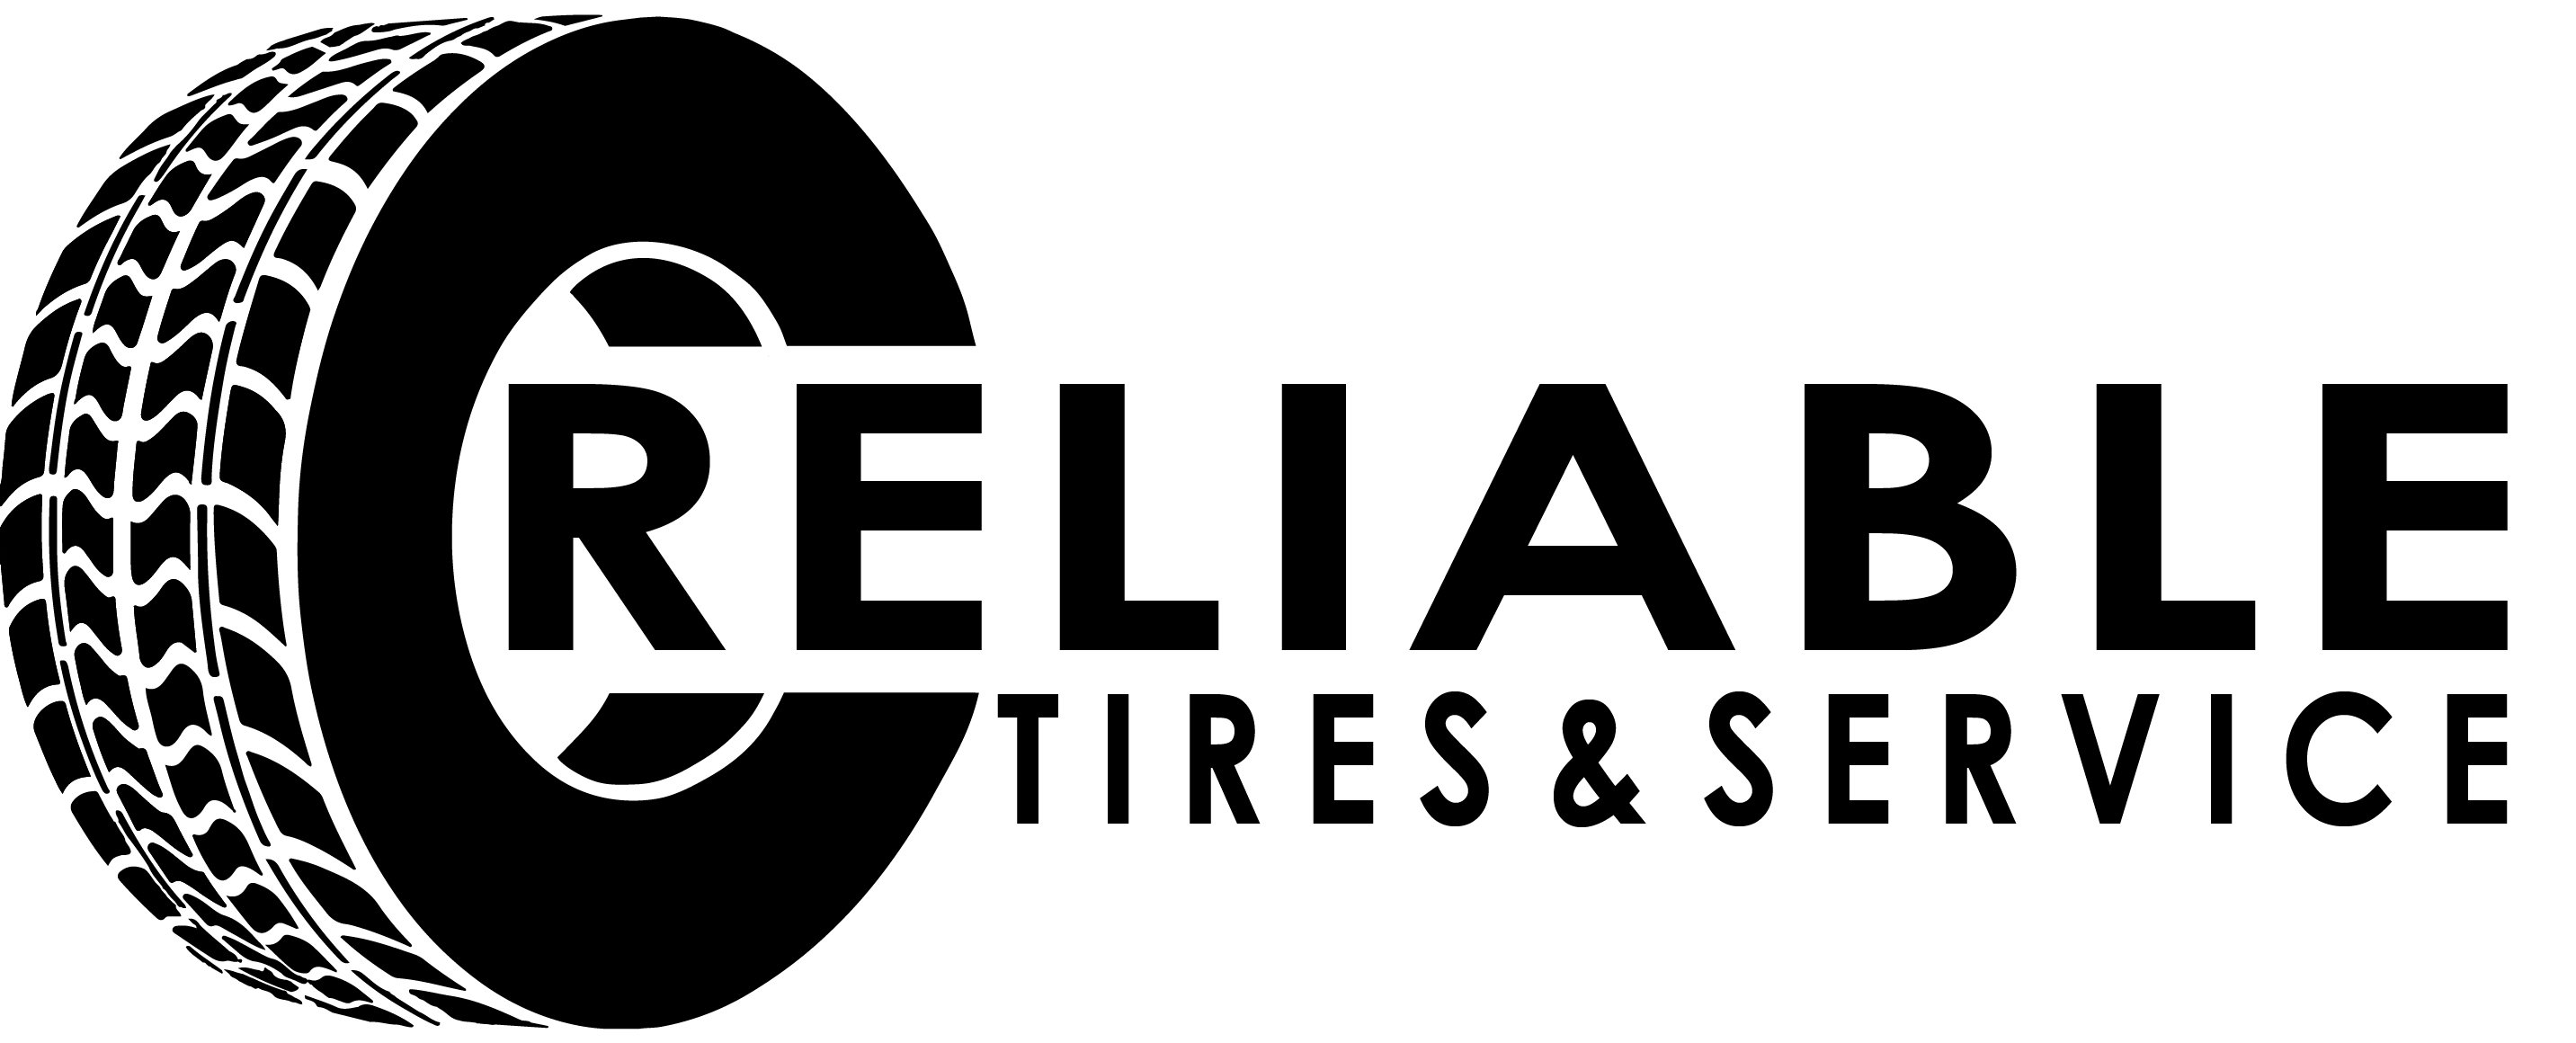 Reliable Tires & Service